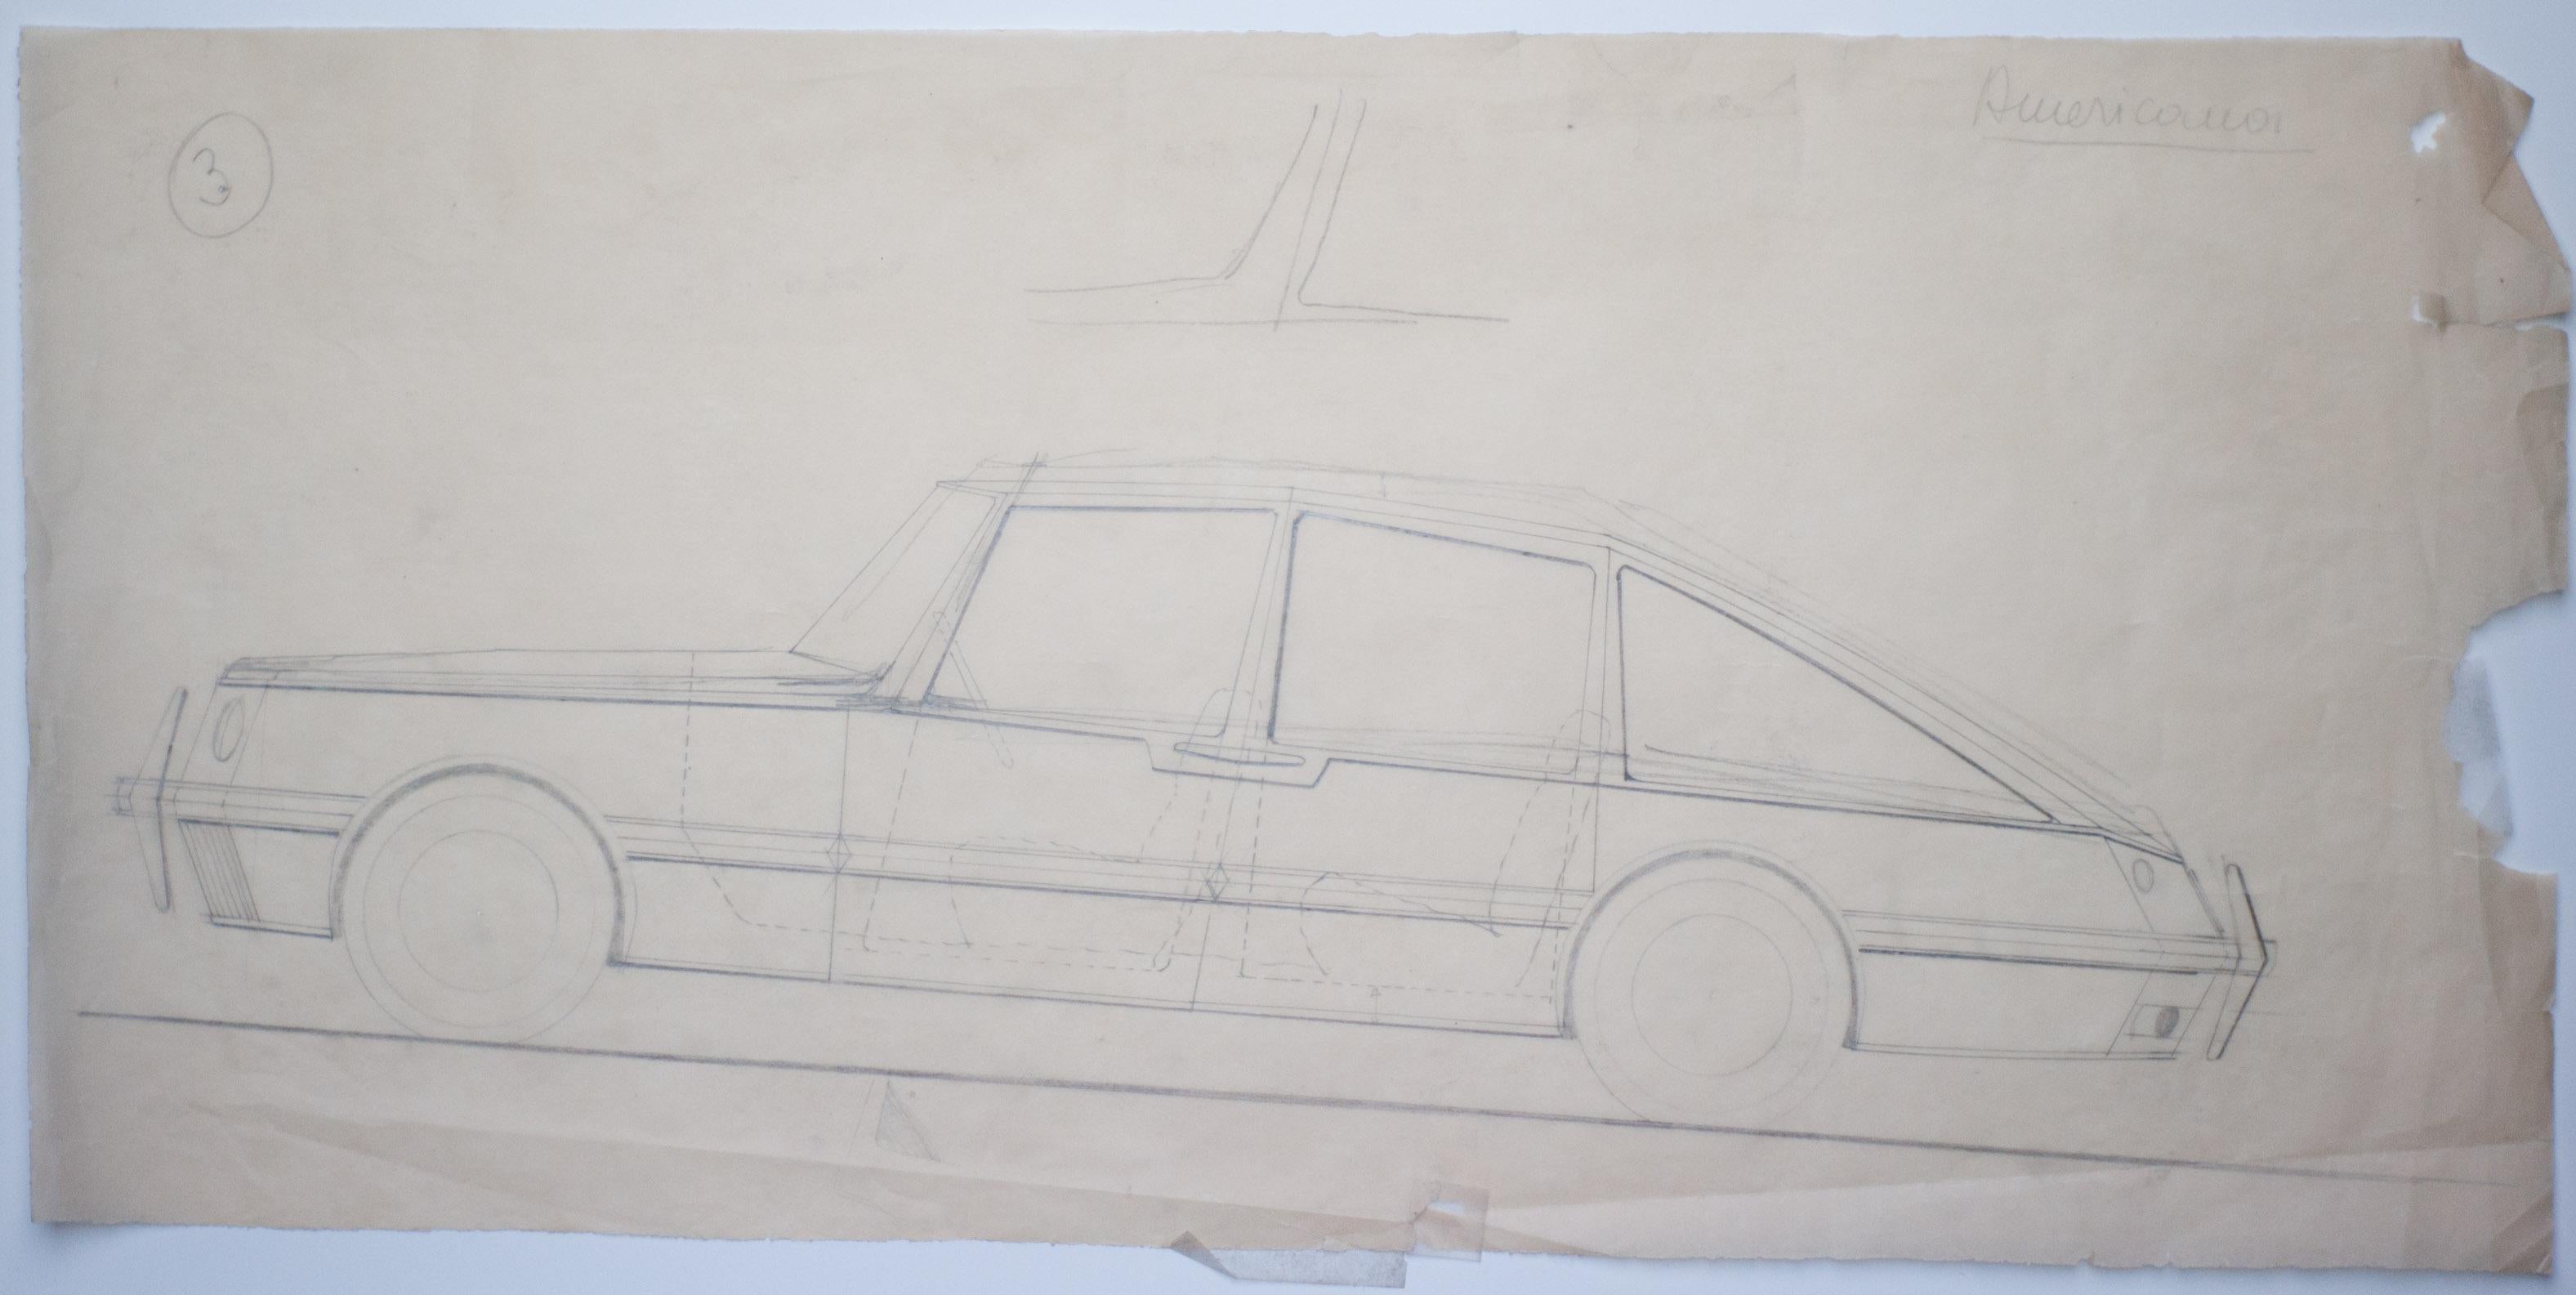 Important drawing by Gio Ponti of the diamante line for Touring Carrozzeria, Milan.
Ponti's car designs where never realized, but his design ideas where very important for the development of the modern car.
Reference: 